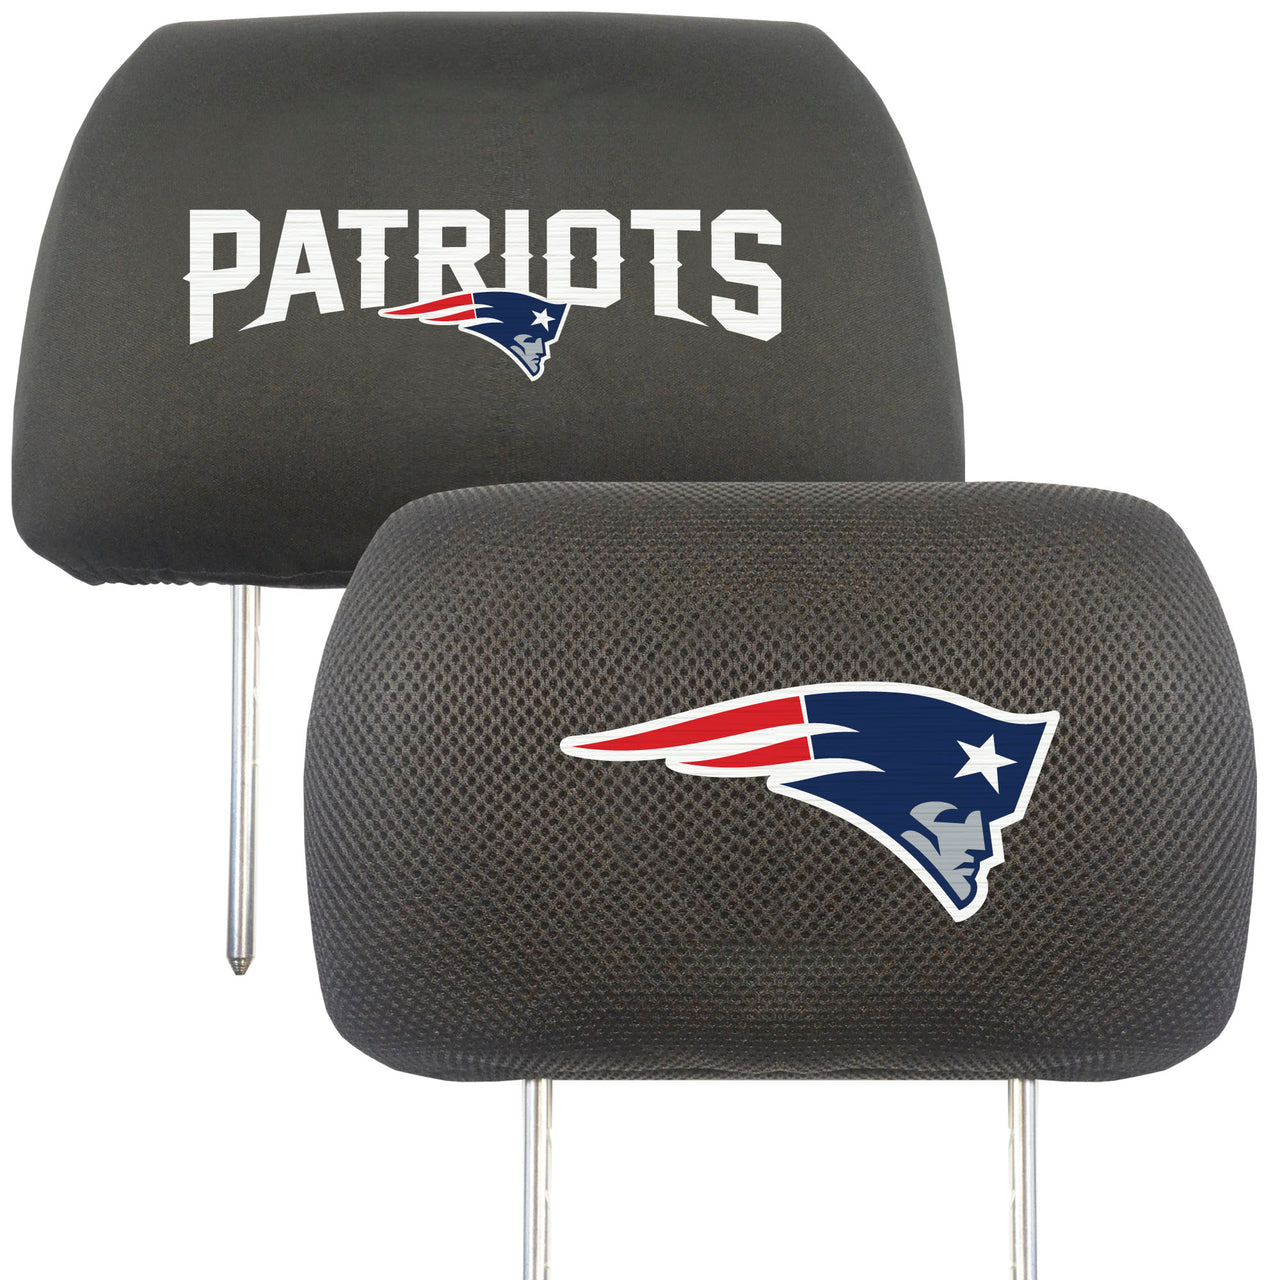 New England Patriots 2-Pack Headrest Covers - Dynasty Sports & Framing 